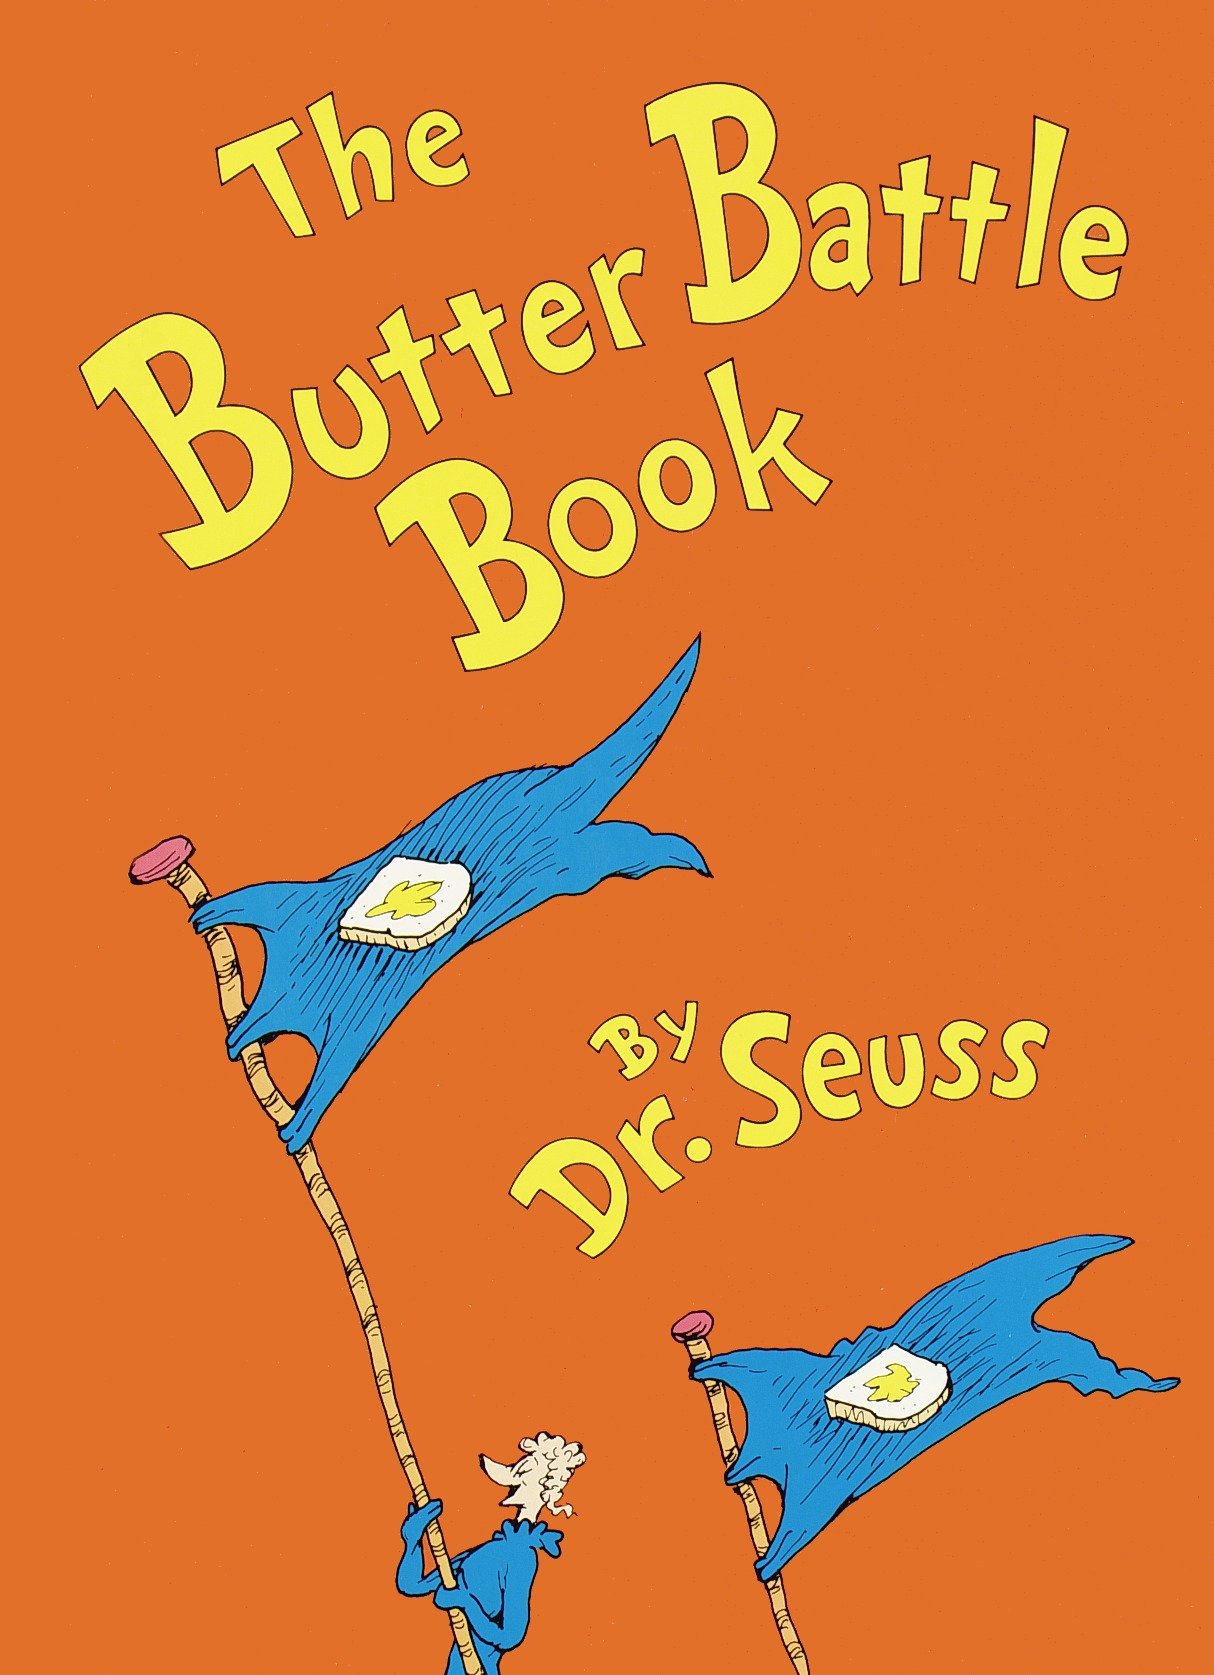 The Butter Battle Book: (New York Times Notable Book of the Year) (Classic Seuss)